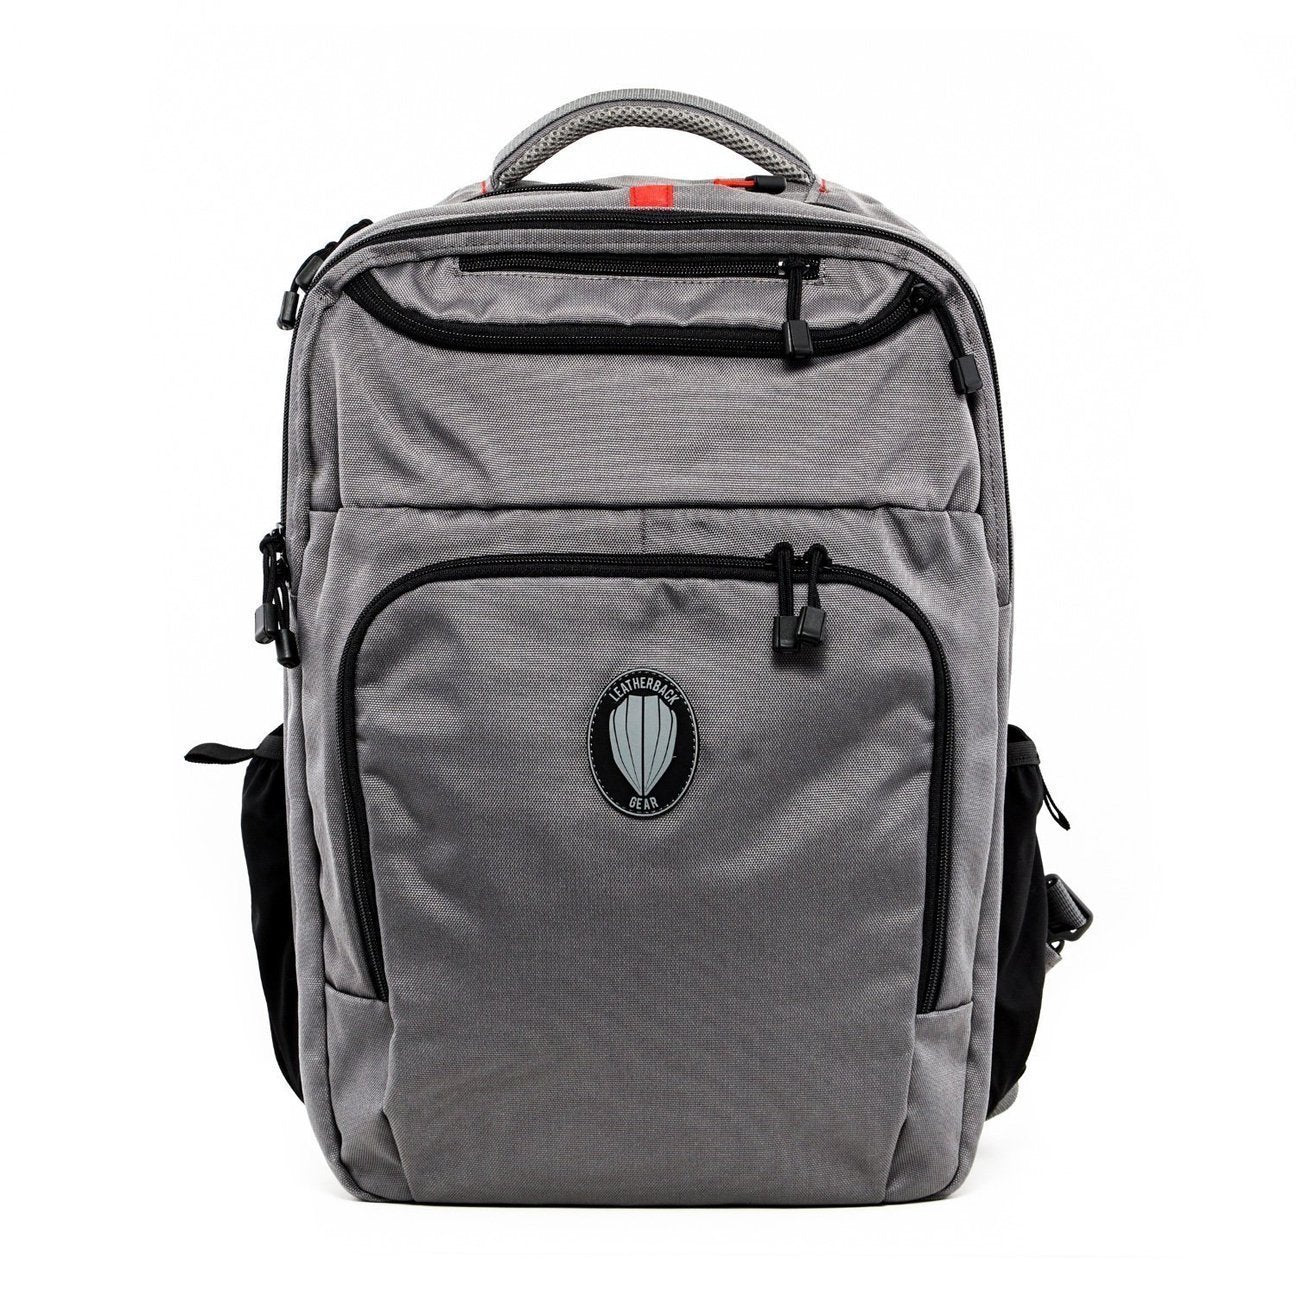 Leatherback Gear Civilian One Armored Backpack Wolf Gray - front image of backpack